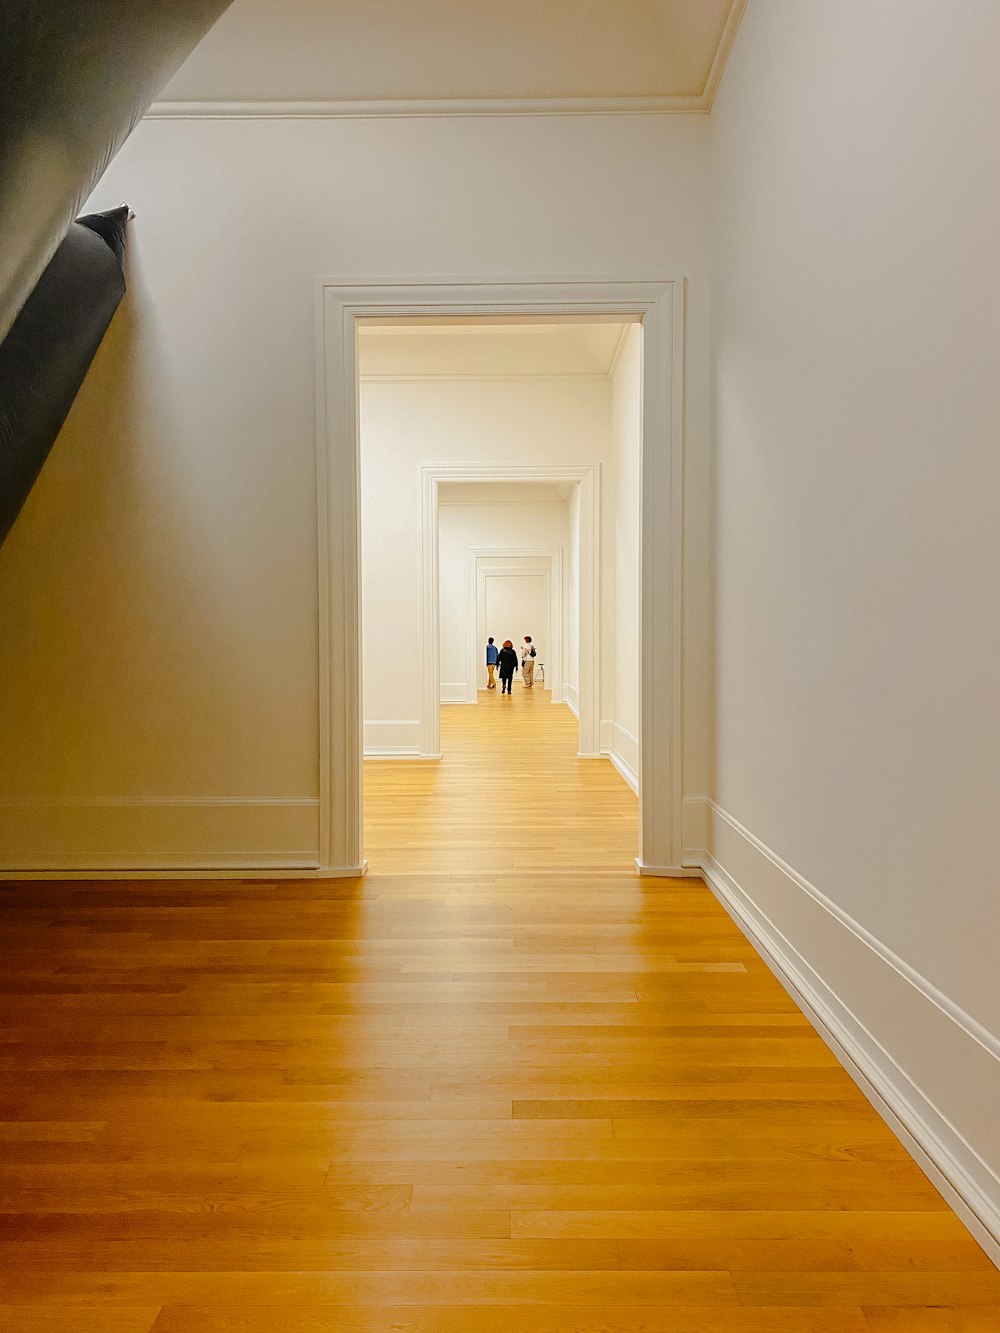 two people walking down a long hallway in a building